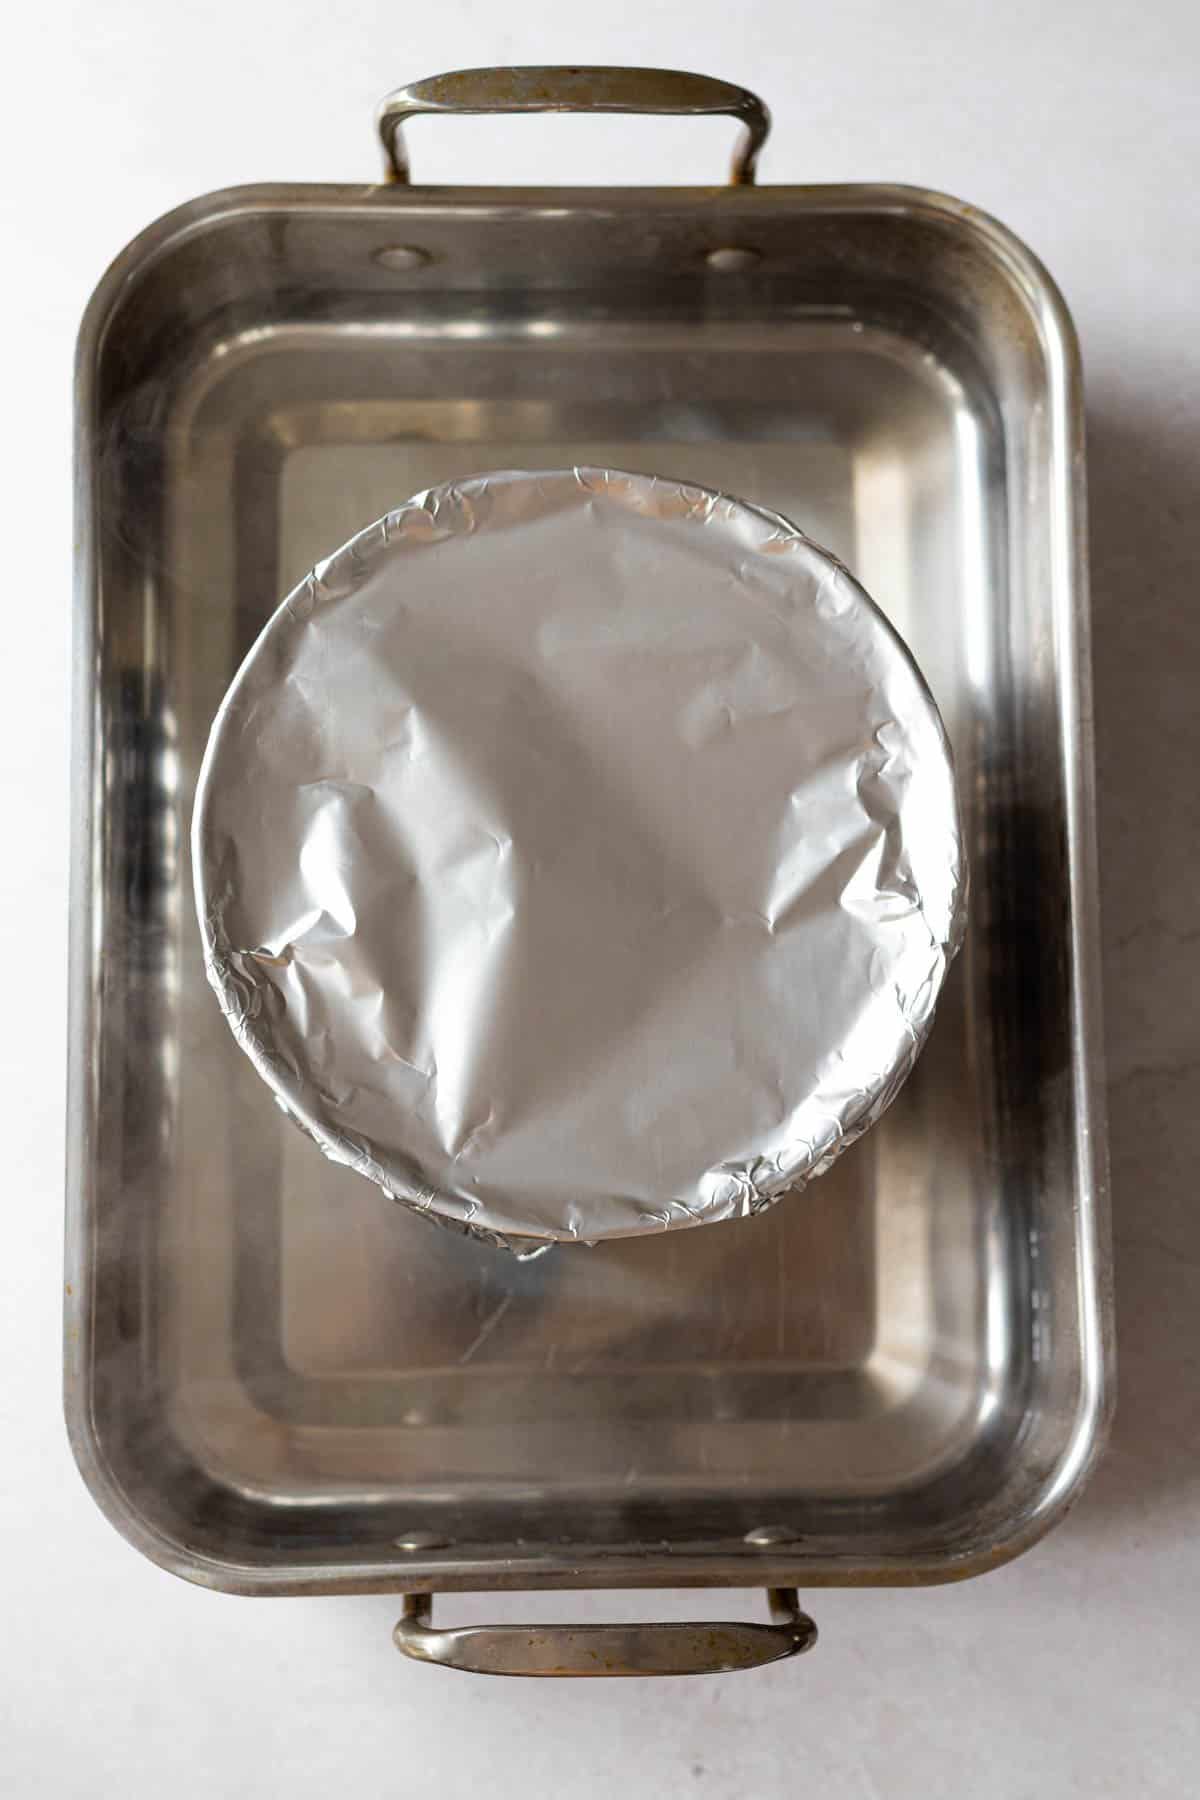 flan mold placed in a water bath